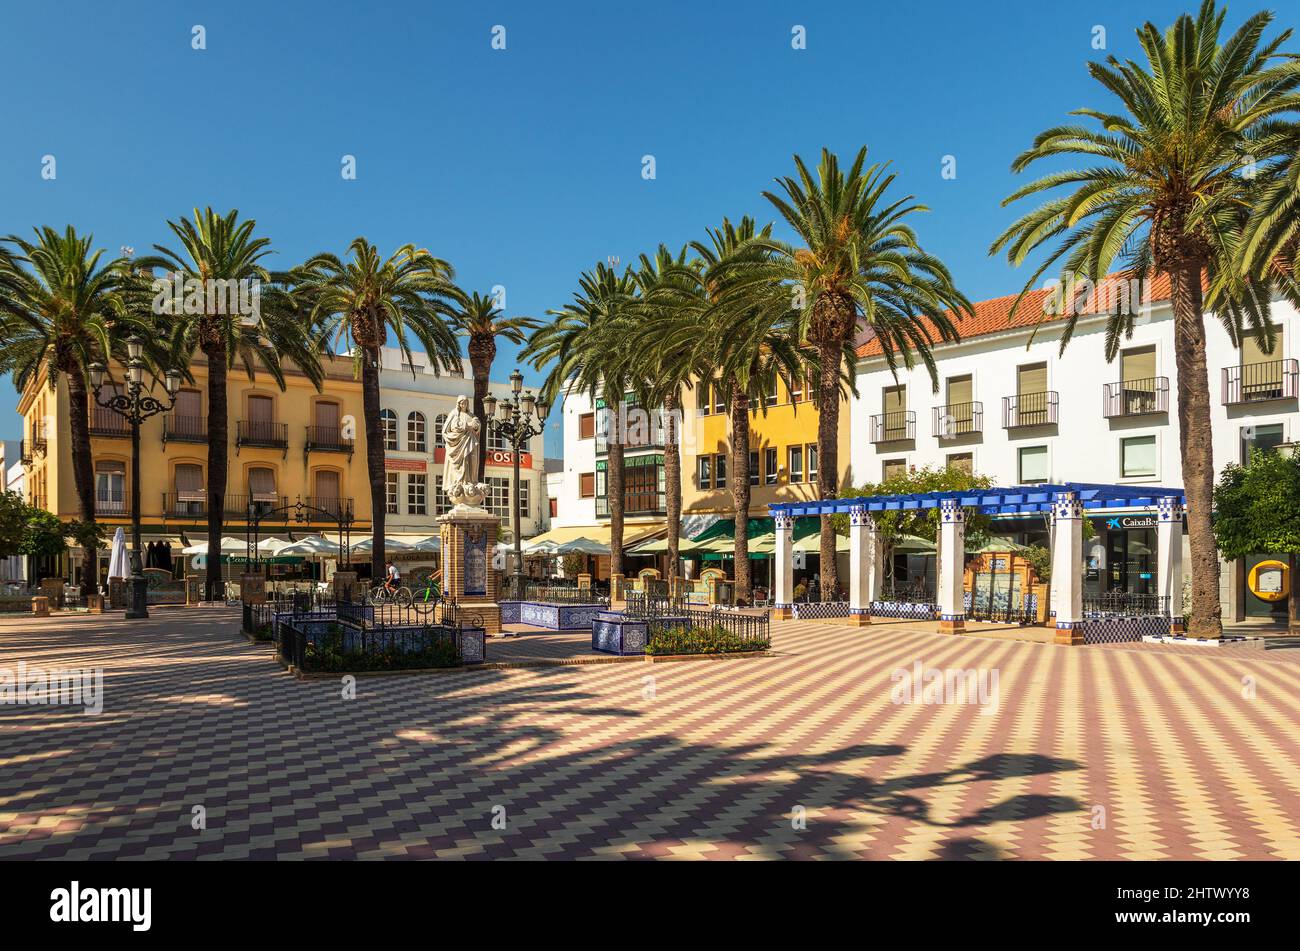 Ayamonte, Spain - July 29, 2021: View of Plaza de la Laguna in Ayamonte, Spain, with the Inmaculada Concepcion monument in the center of the square. Stock Photo